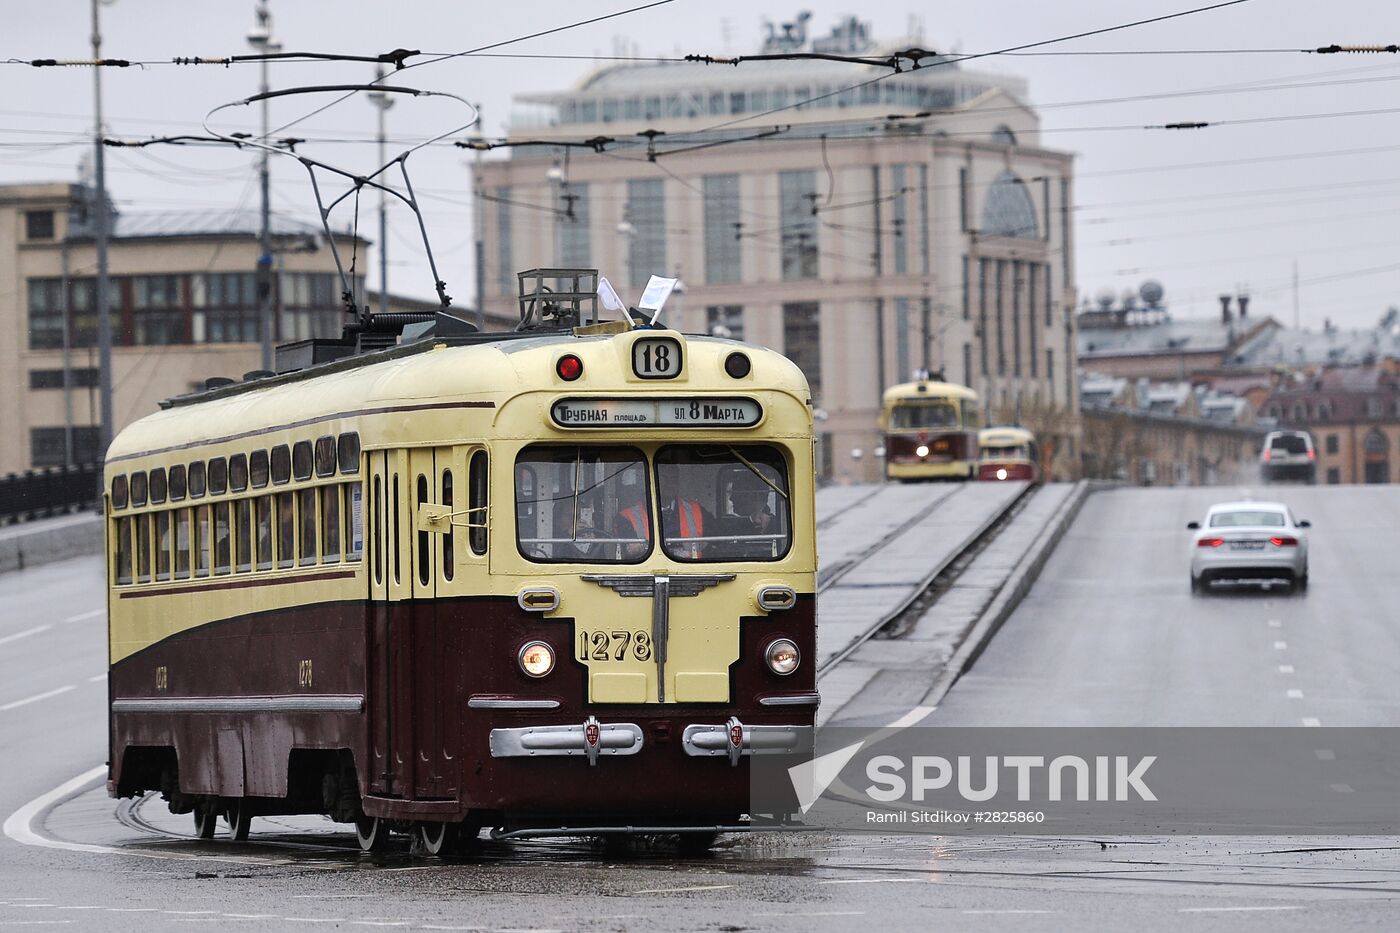 Moscow Tram Day at Chistye Prudy